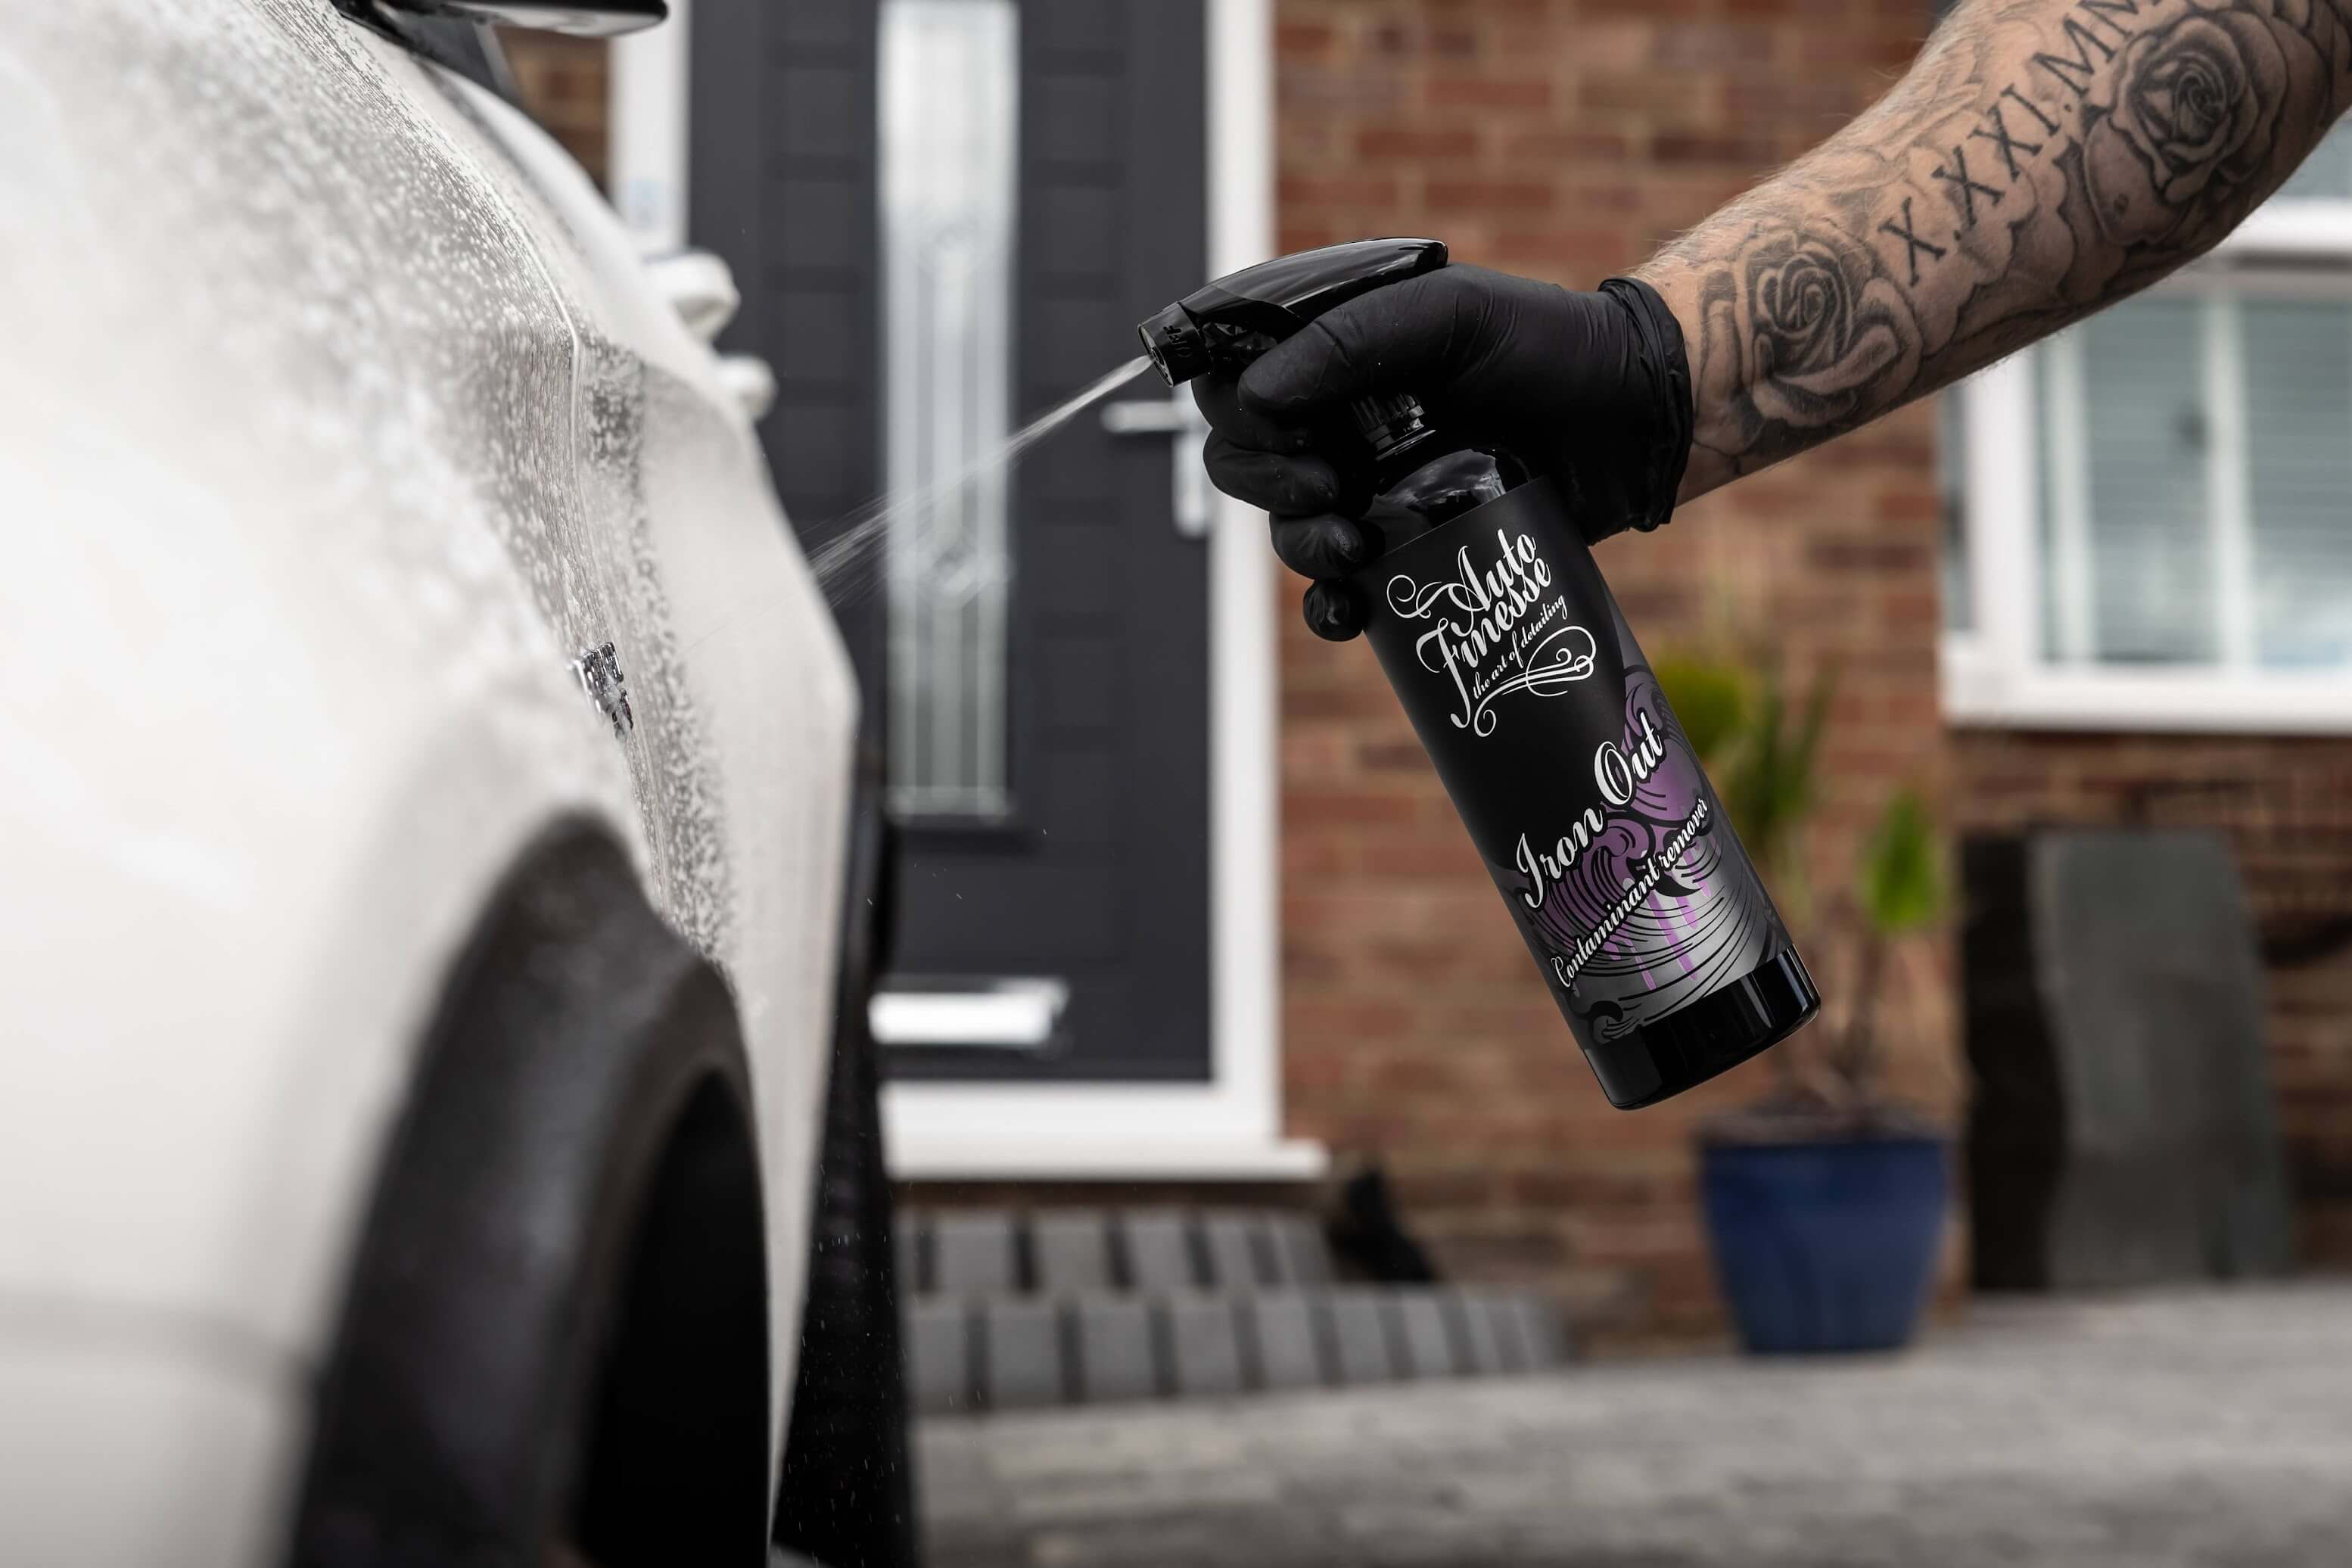 Auto Finesse | Iron Out Fallout Remover | Contaminant Remover